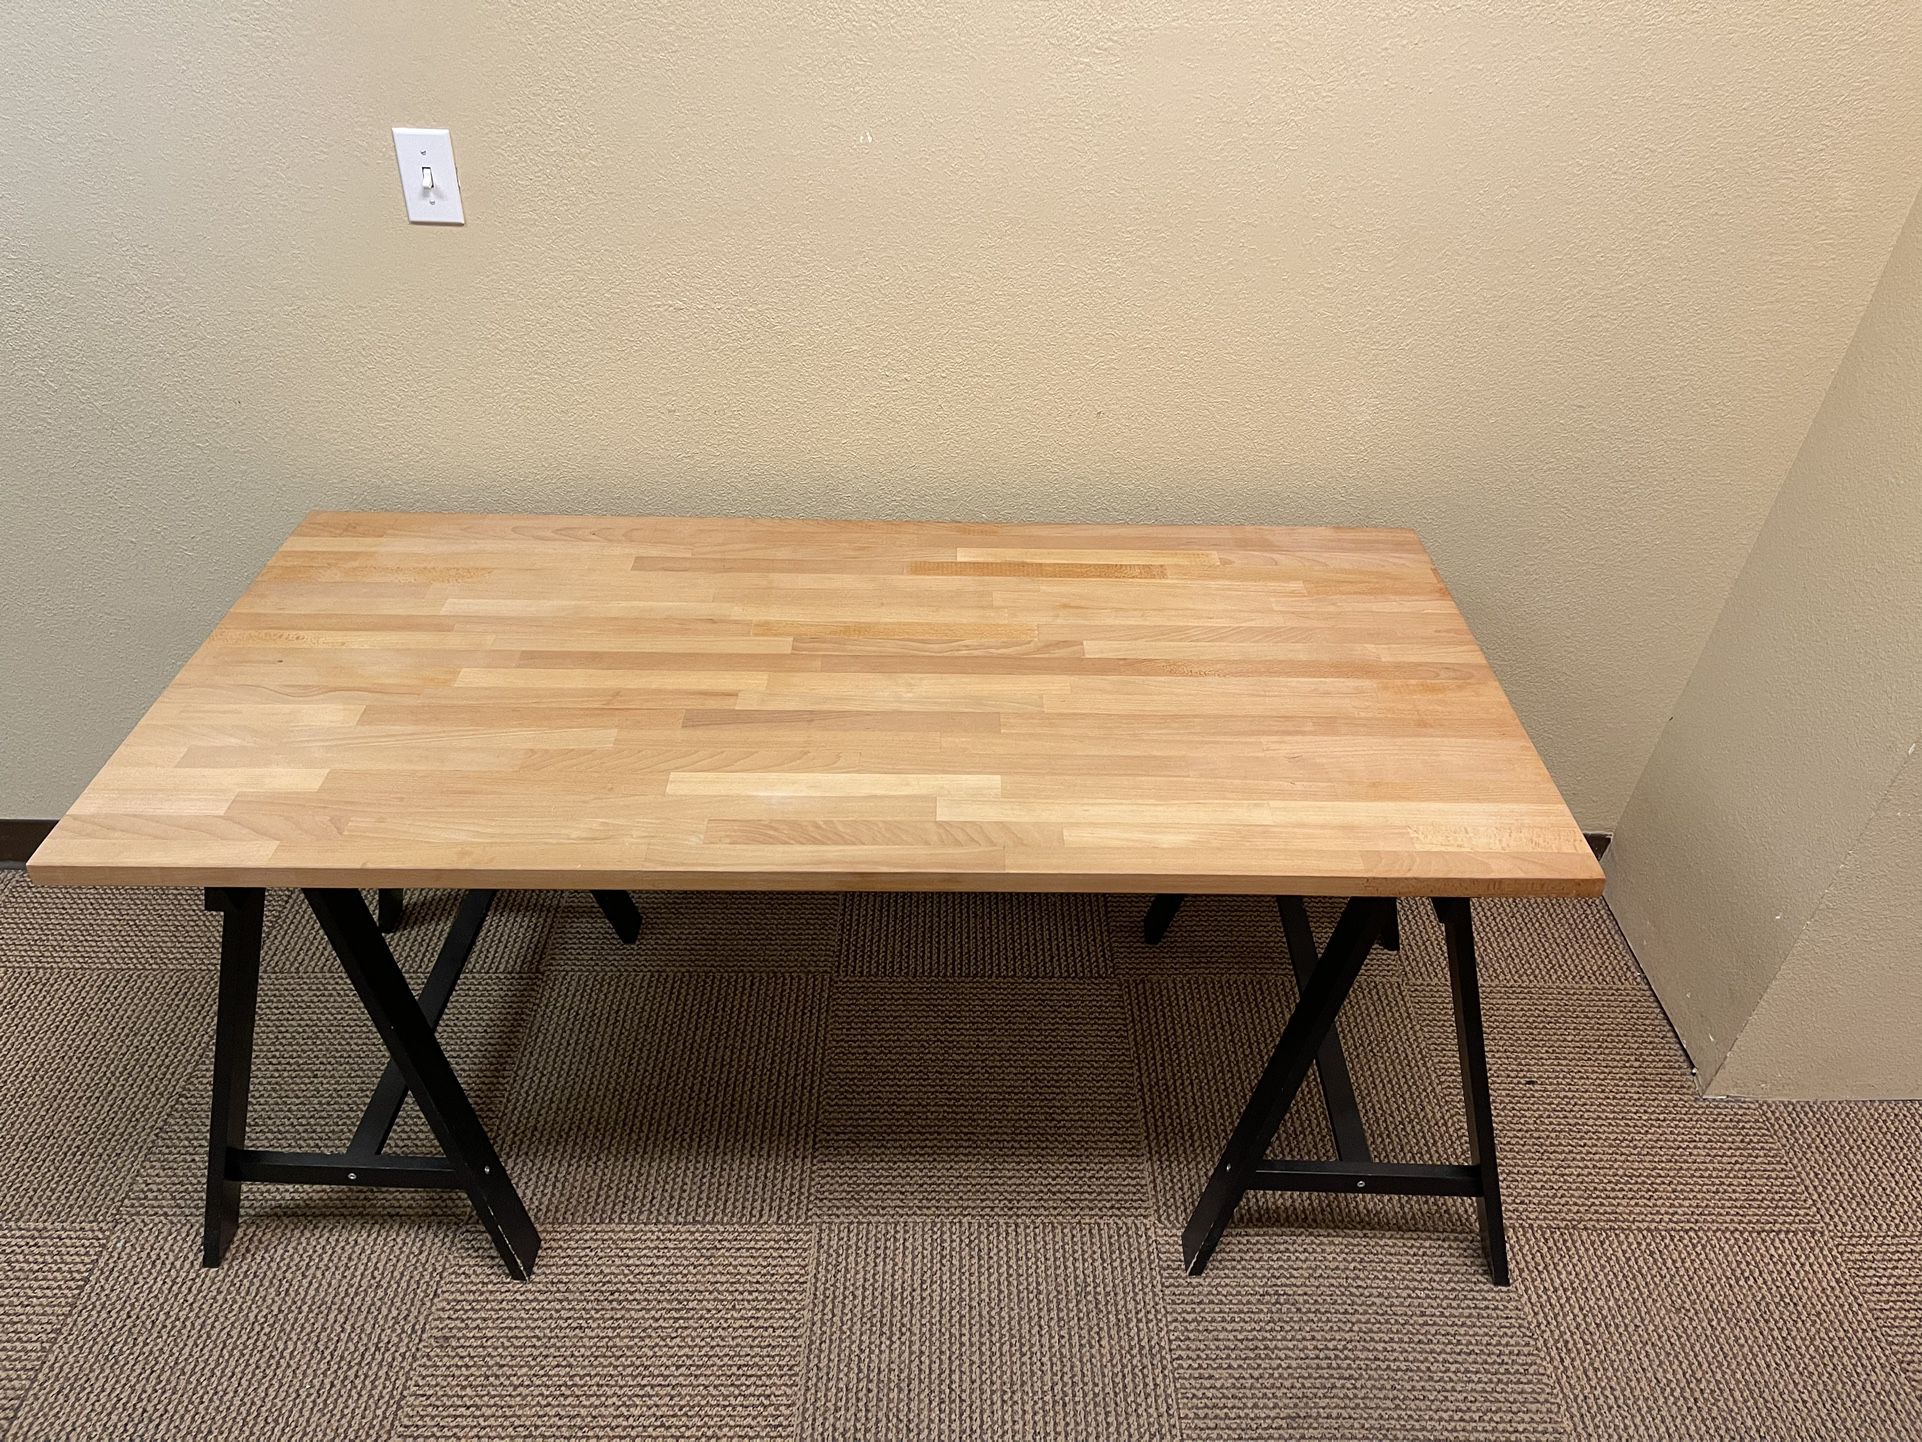 Table For Home Office Or Garage